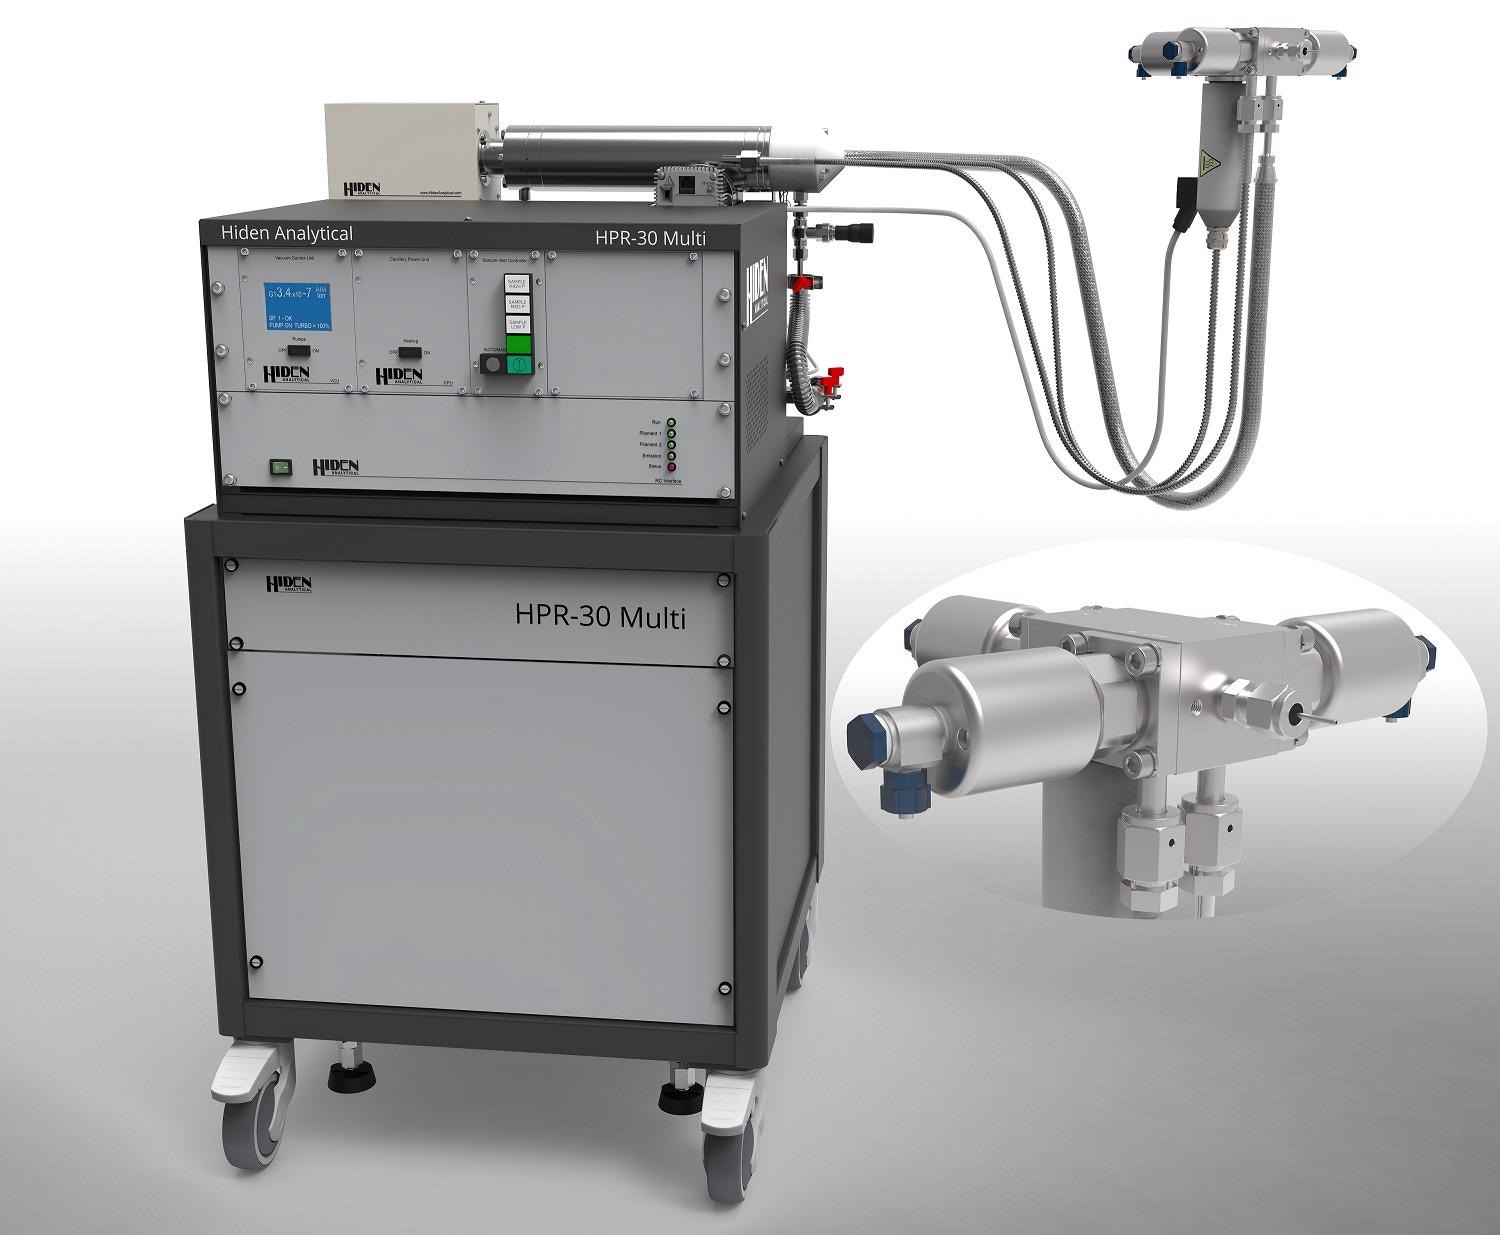 HPR-30: Residual Gas Analyzer for Vacuum Process Analysis from Hiden Analytical